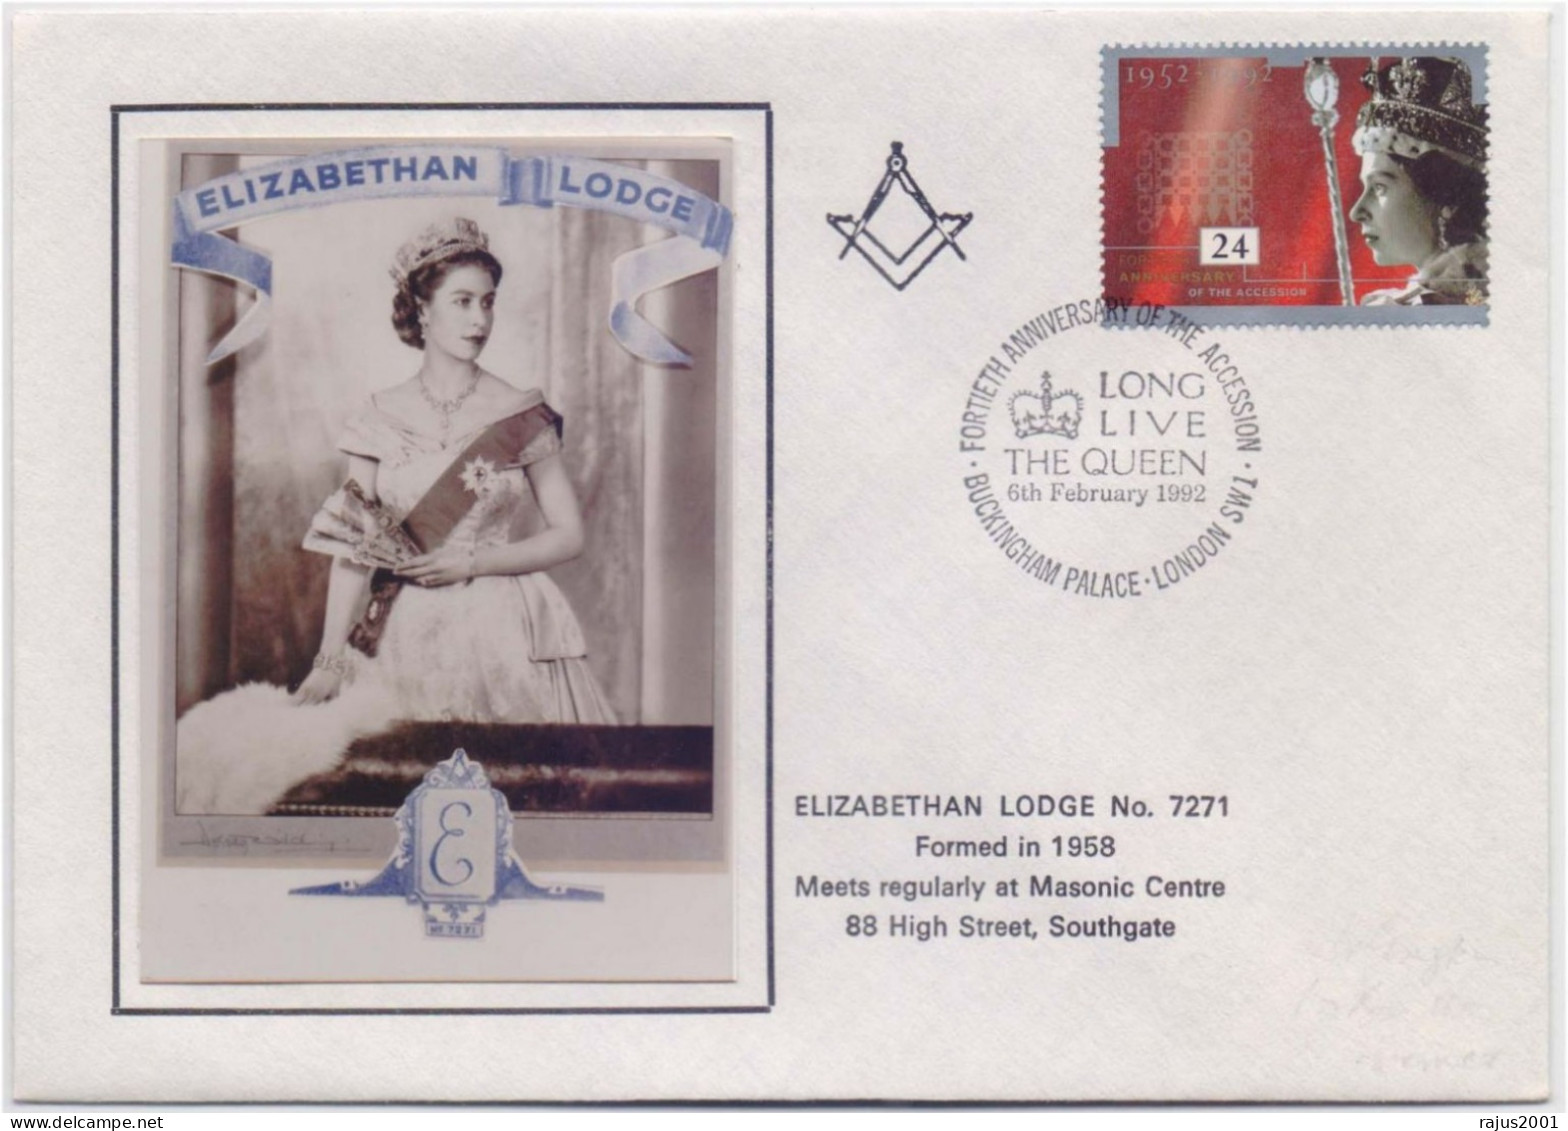 ELIZABETHAN LODGE NO 7271 FORMED IN 1958, Queen Elizabeth, Freemasonry, Masonic Limited Only 100 Cover Issued Cover - Freemasonry